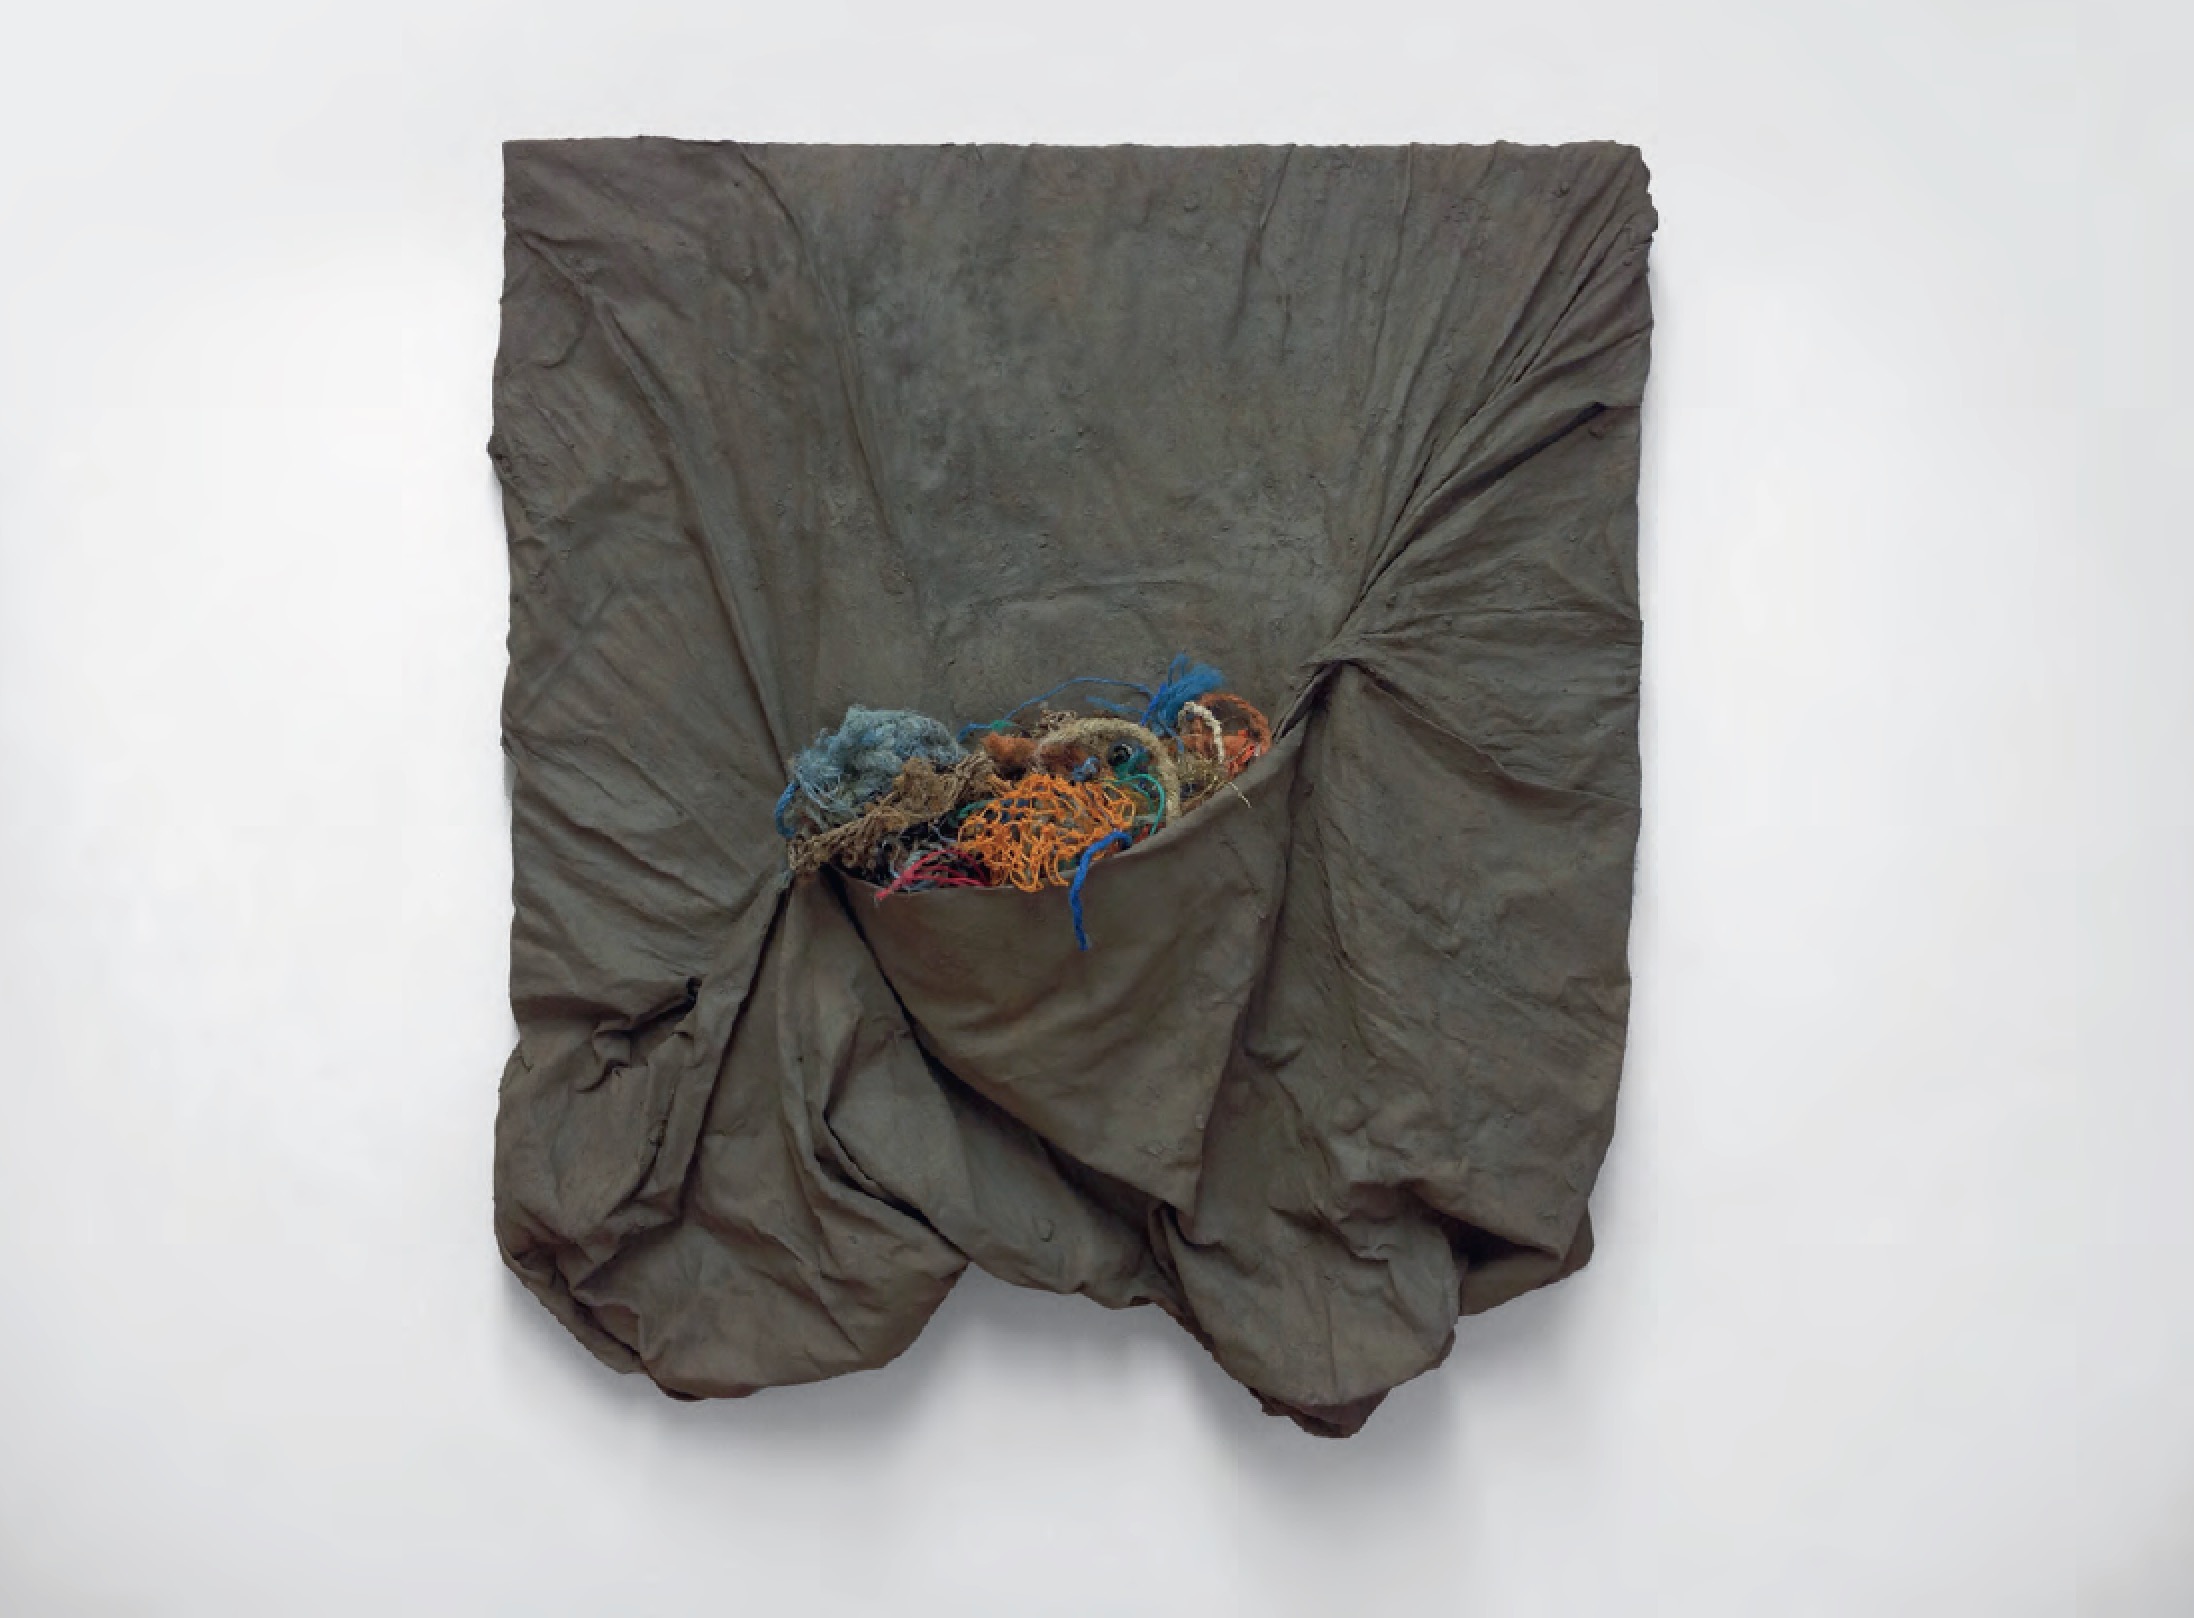 Coming Home, 2014 Bed sheet, River Tees clay, found rope - Emily Hesse